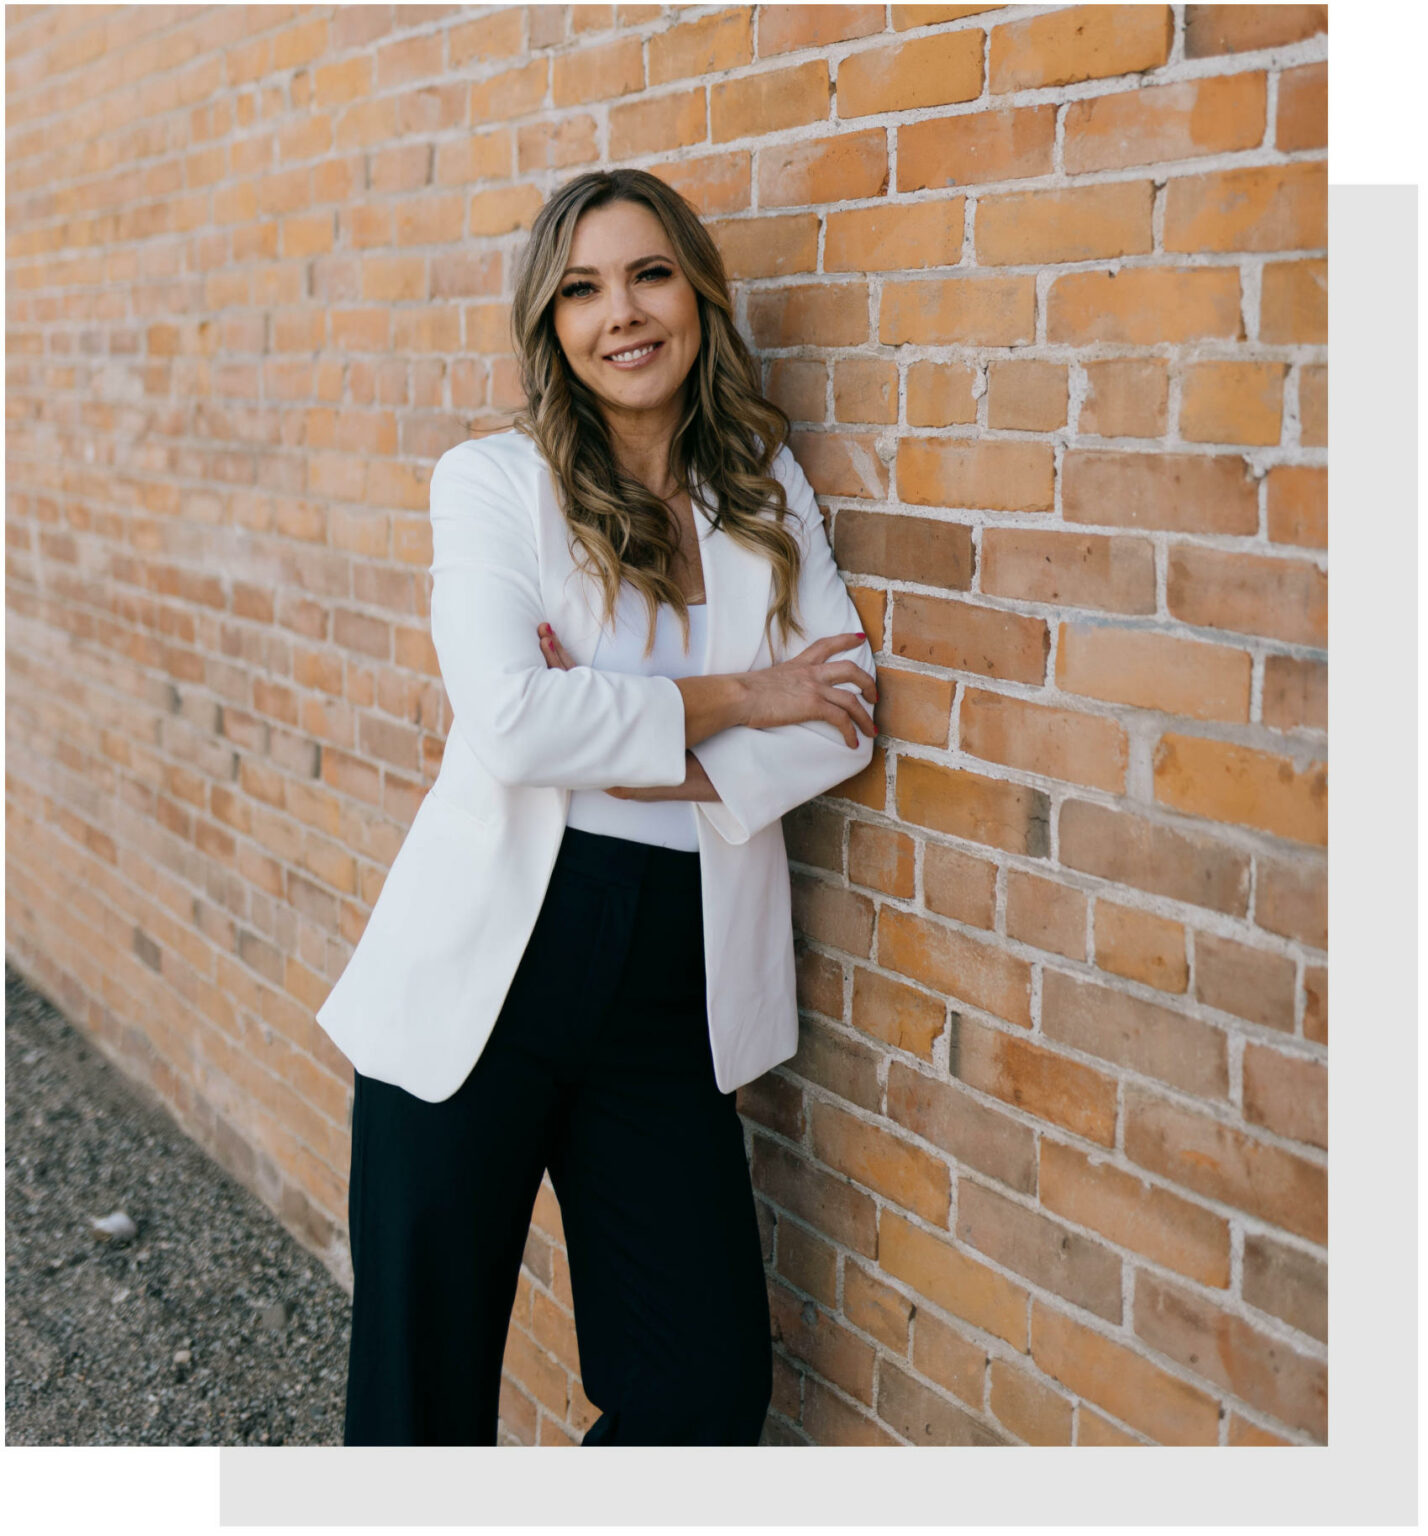 Kamloops mortgage consultant Sarah Park leaning against a brick call in a white coat and black pants.